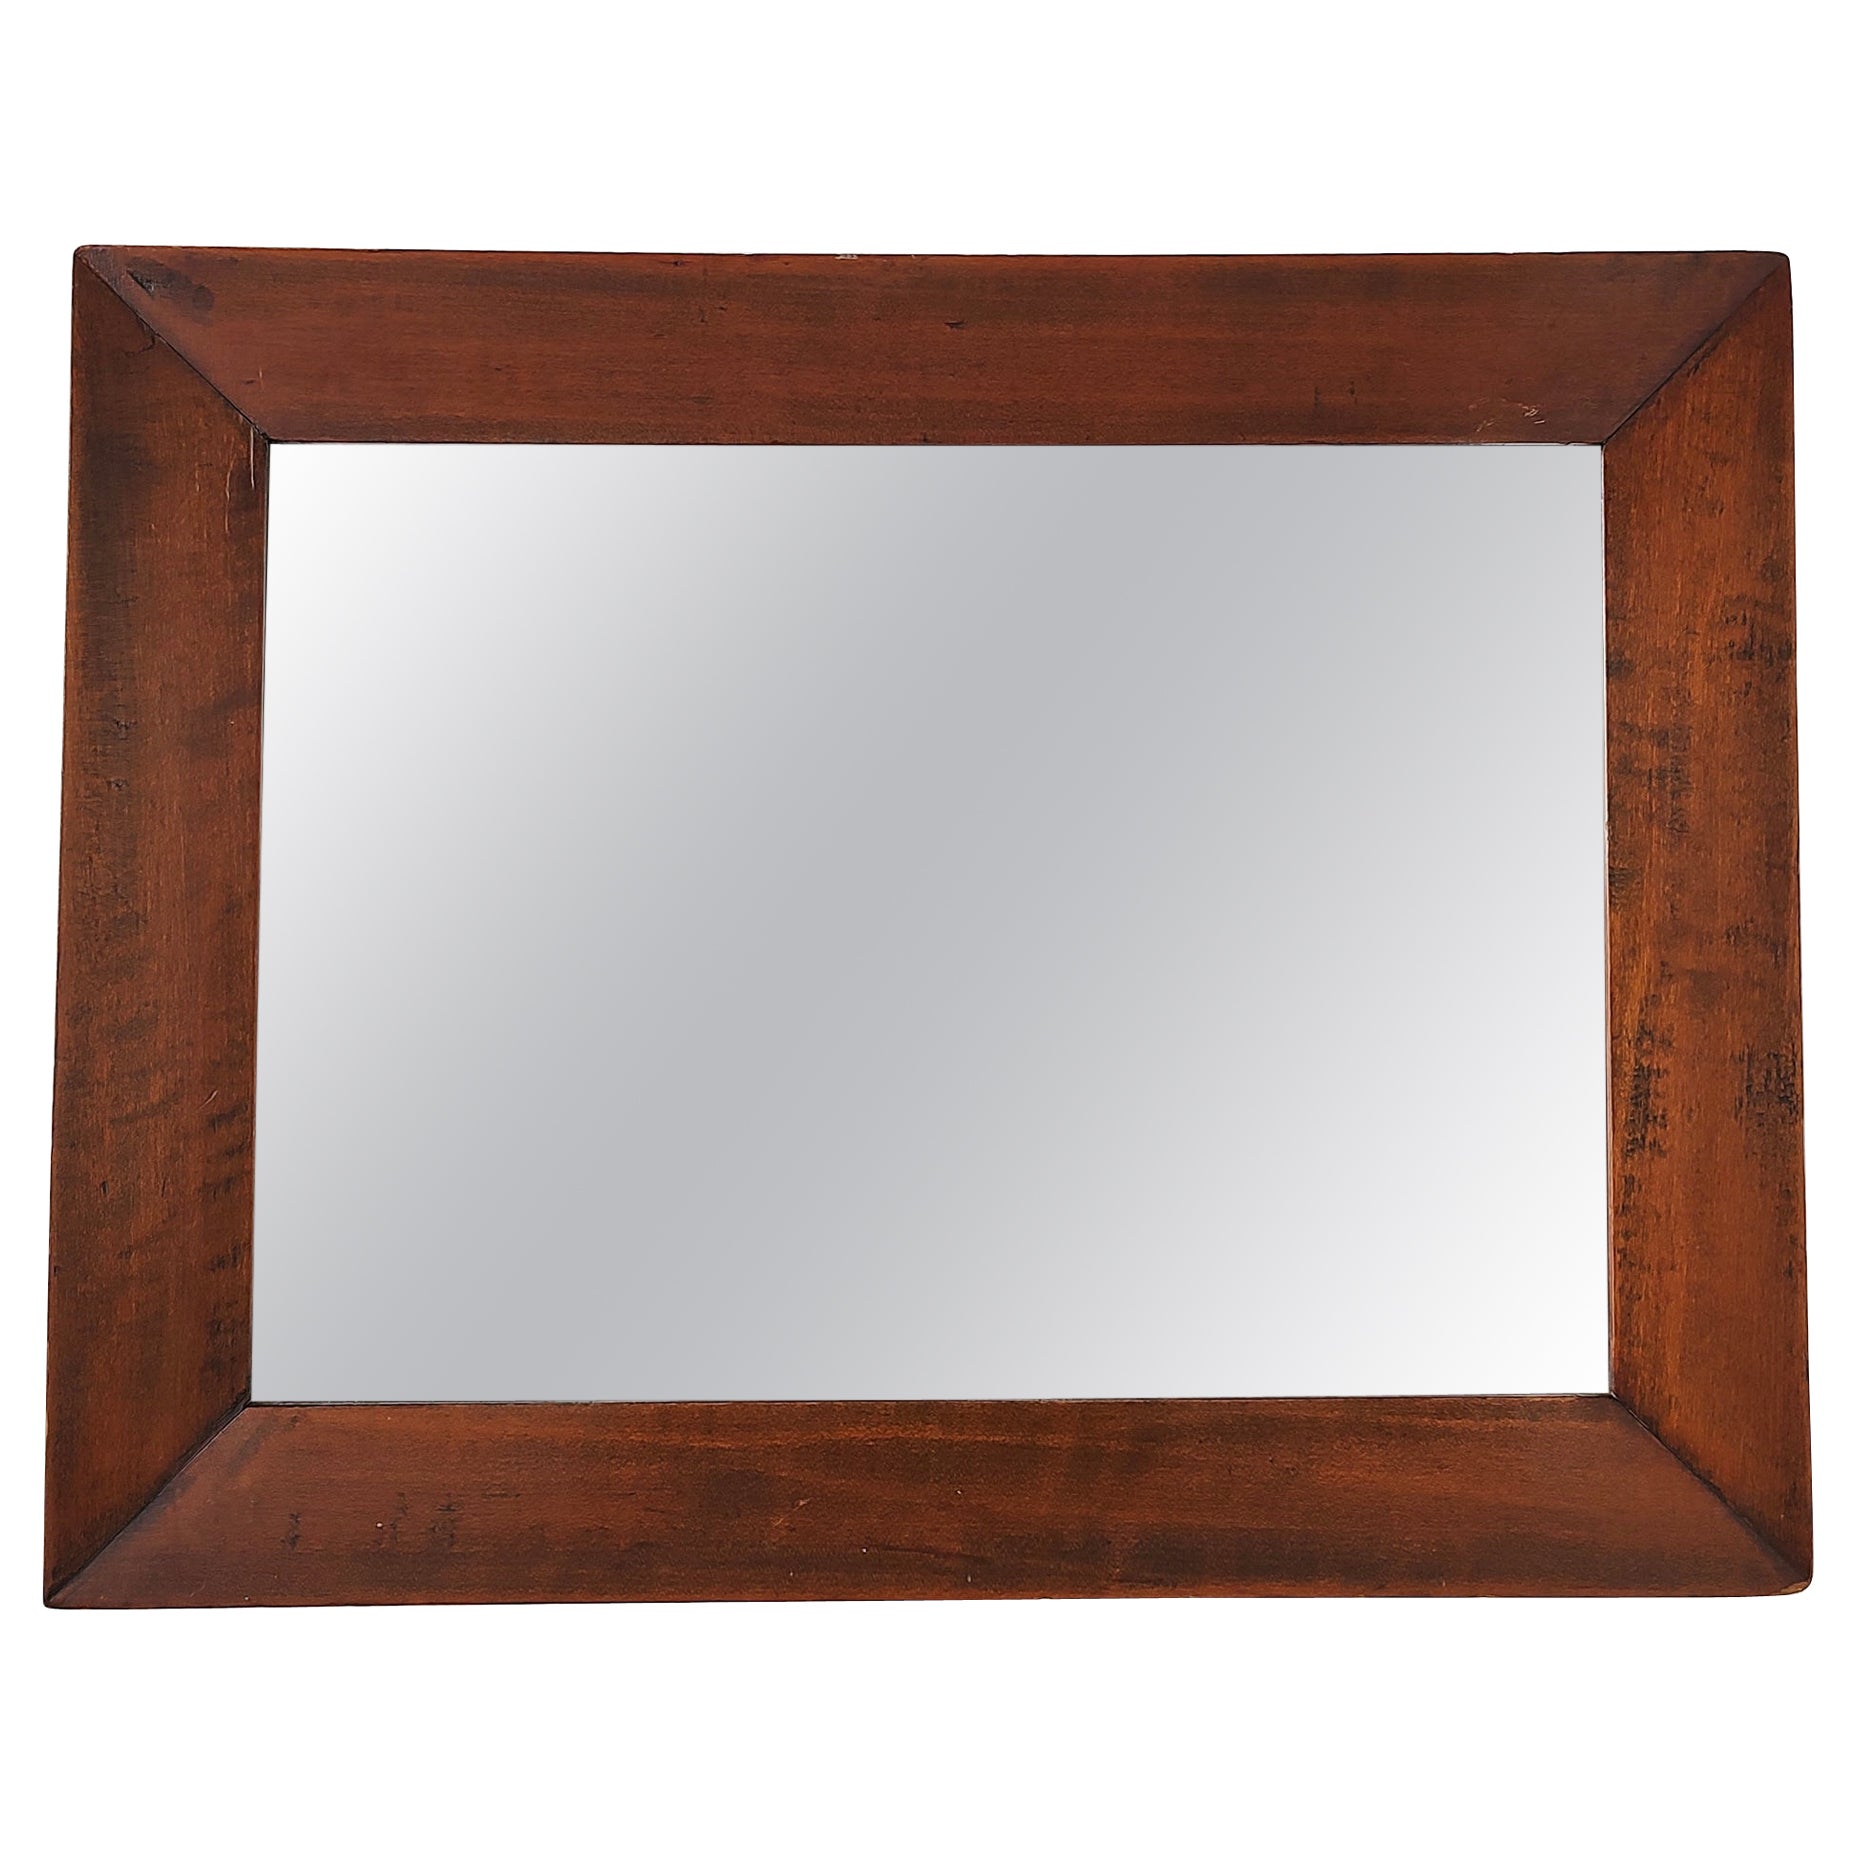 Small Antique Mitered Wood Frame Wall Mirror Early 20th Century For Sale